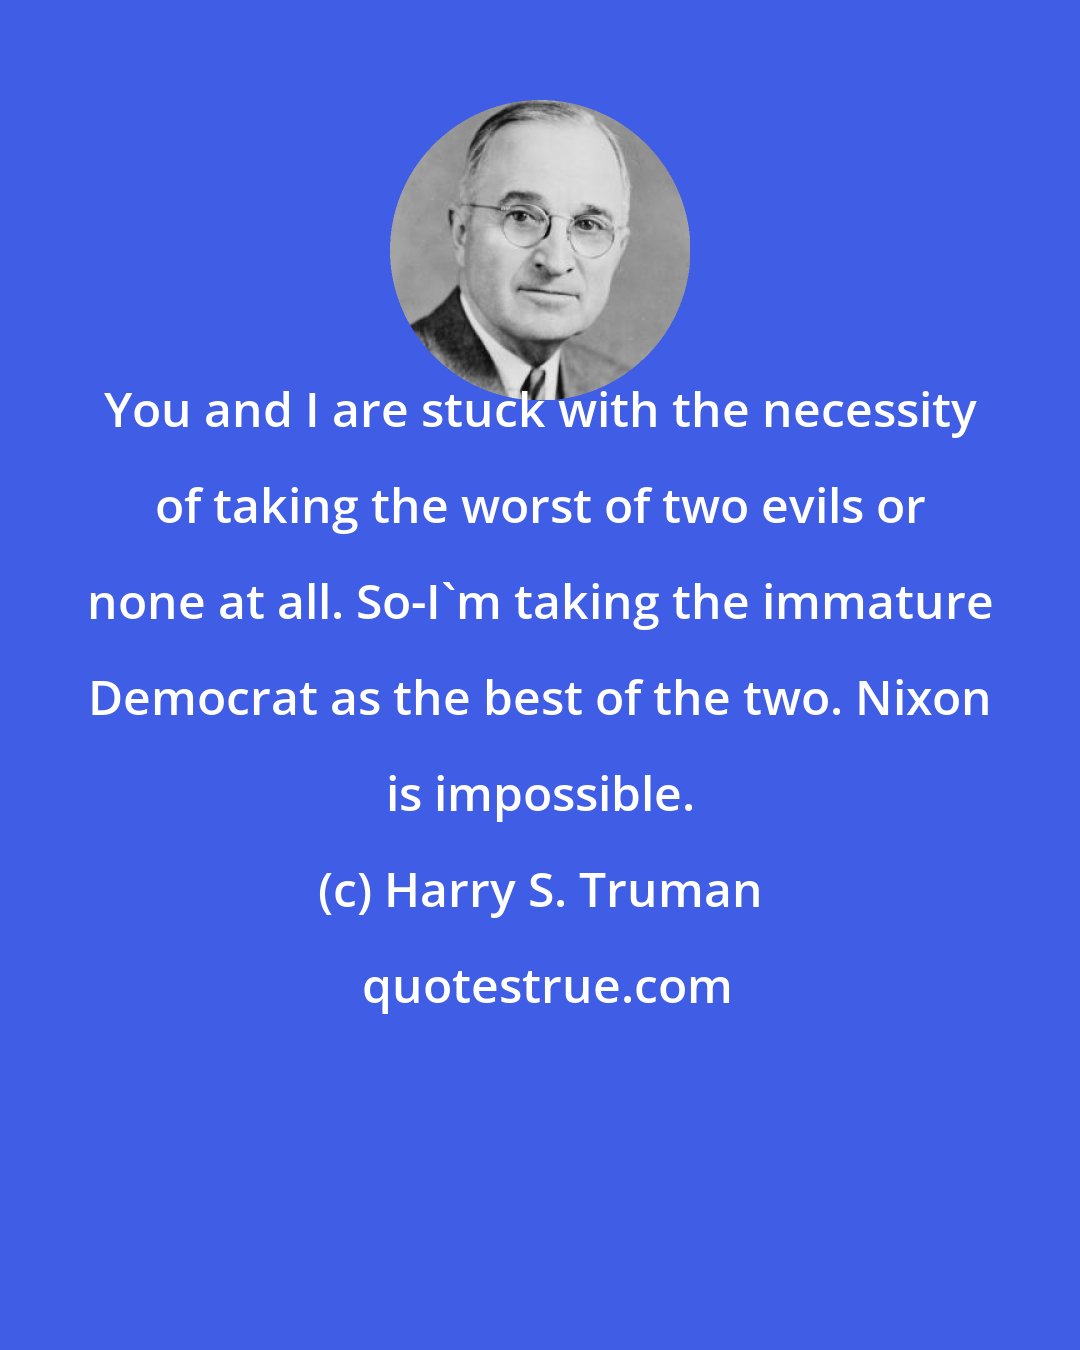 Harry S. Truman: You and I are stuck with the necessity of taking the worst of two evils or none at all. So-I'm taking the immature Democrat as the best of the two. Nixon is impossible.